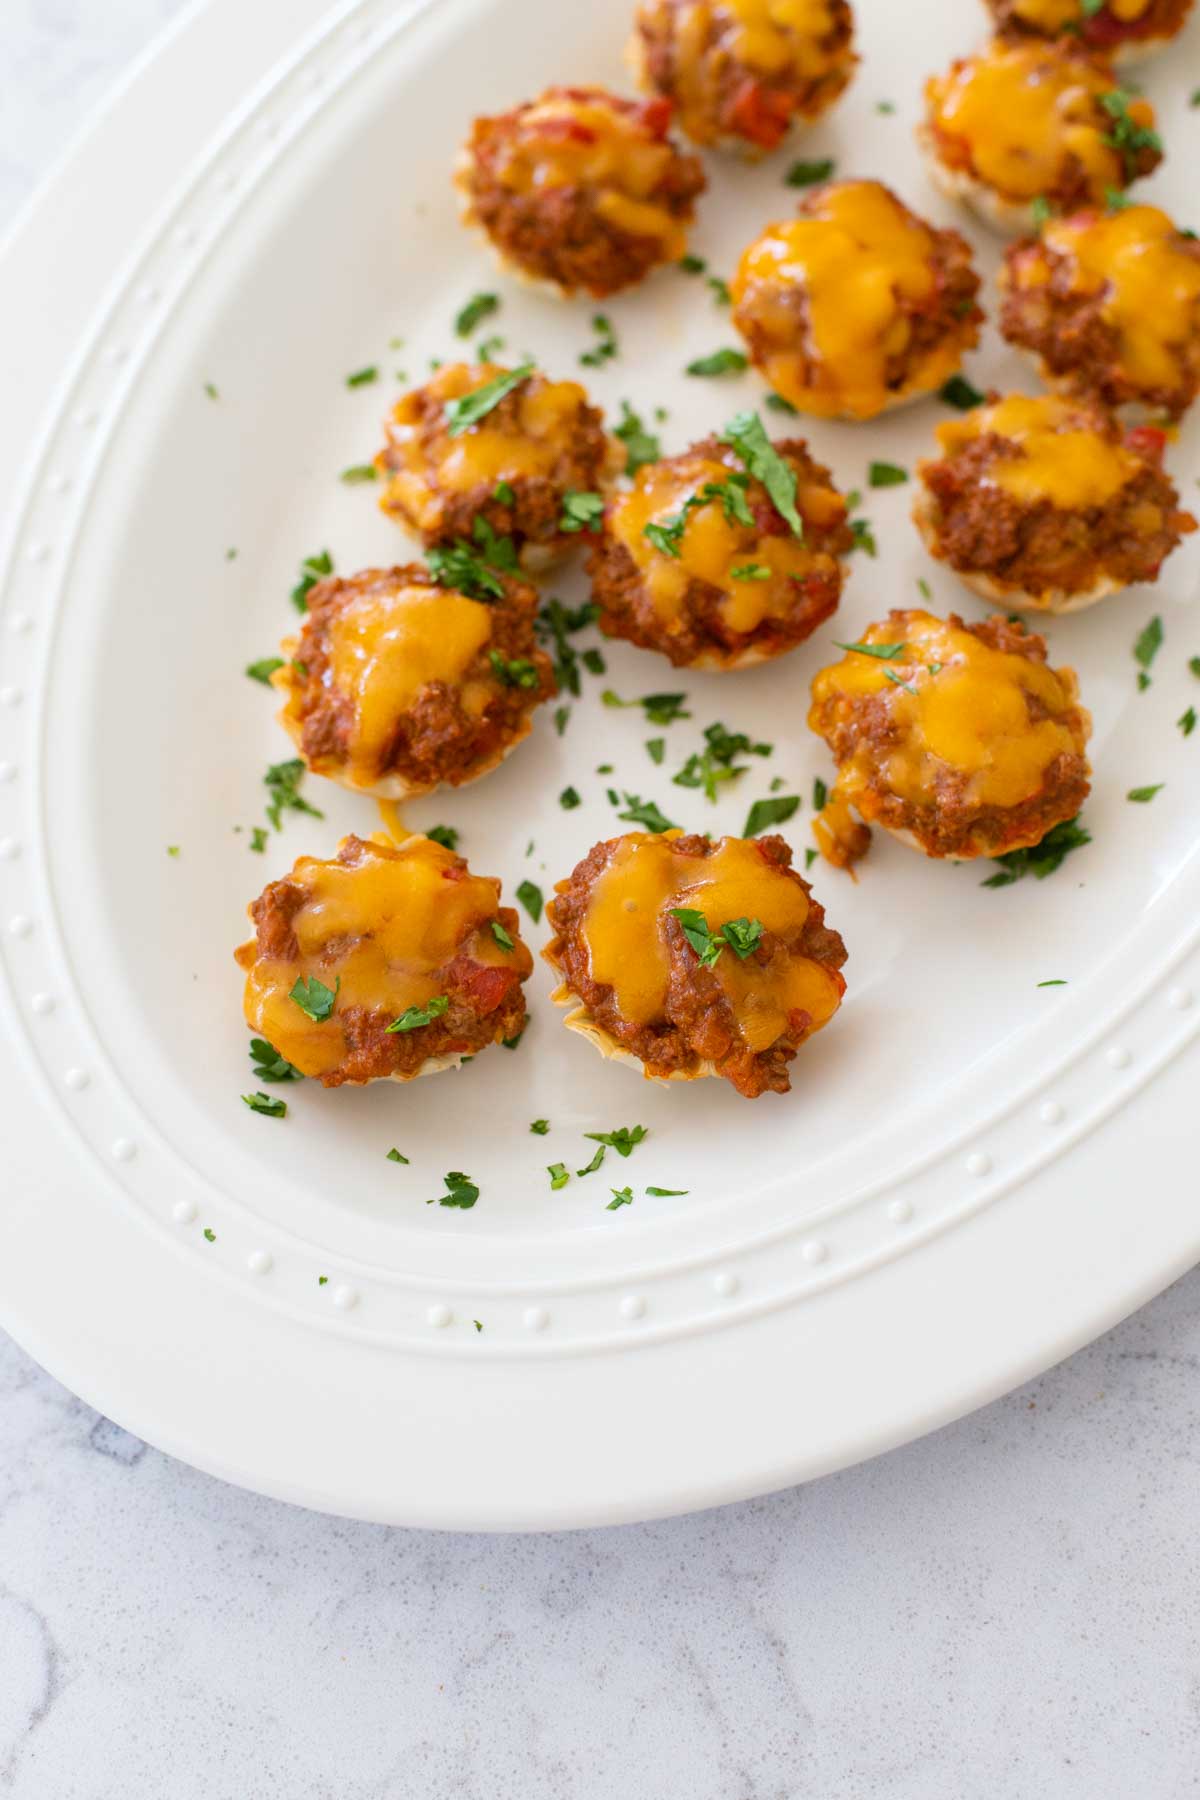 The baked taco bites are served on a white platter and sprinkled with green parsley.